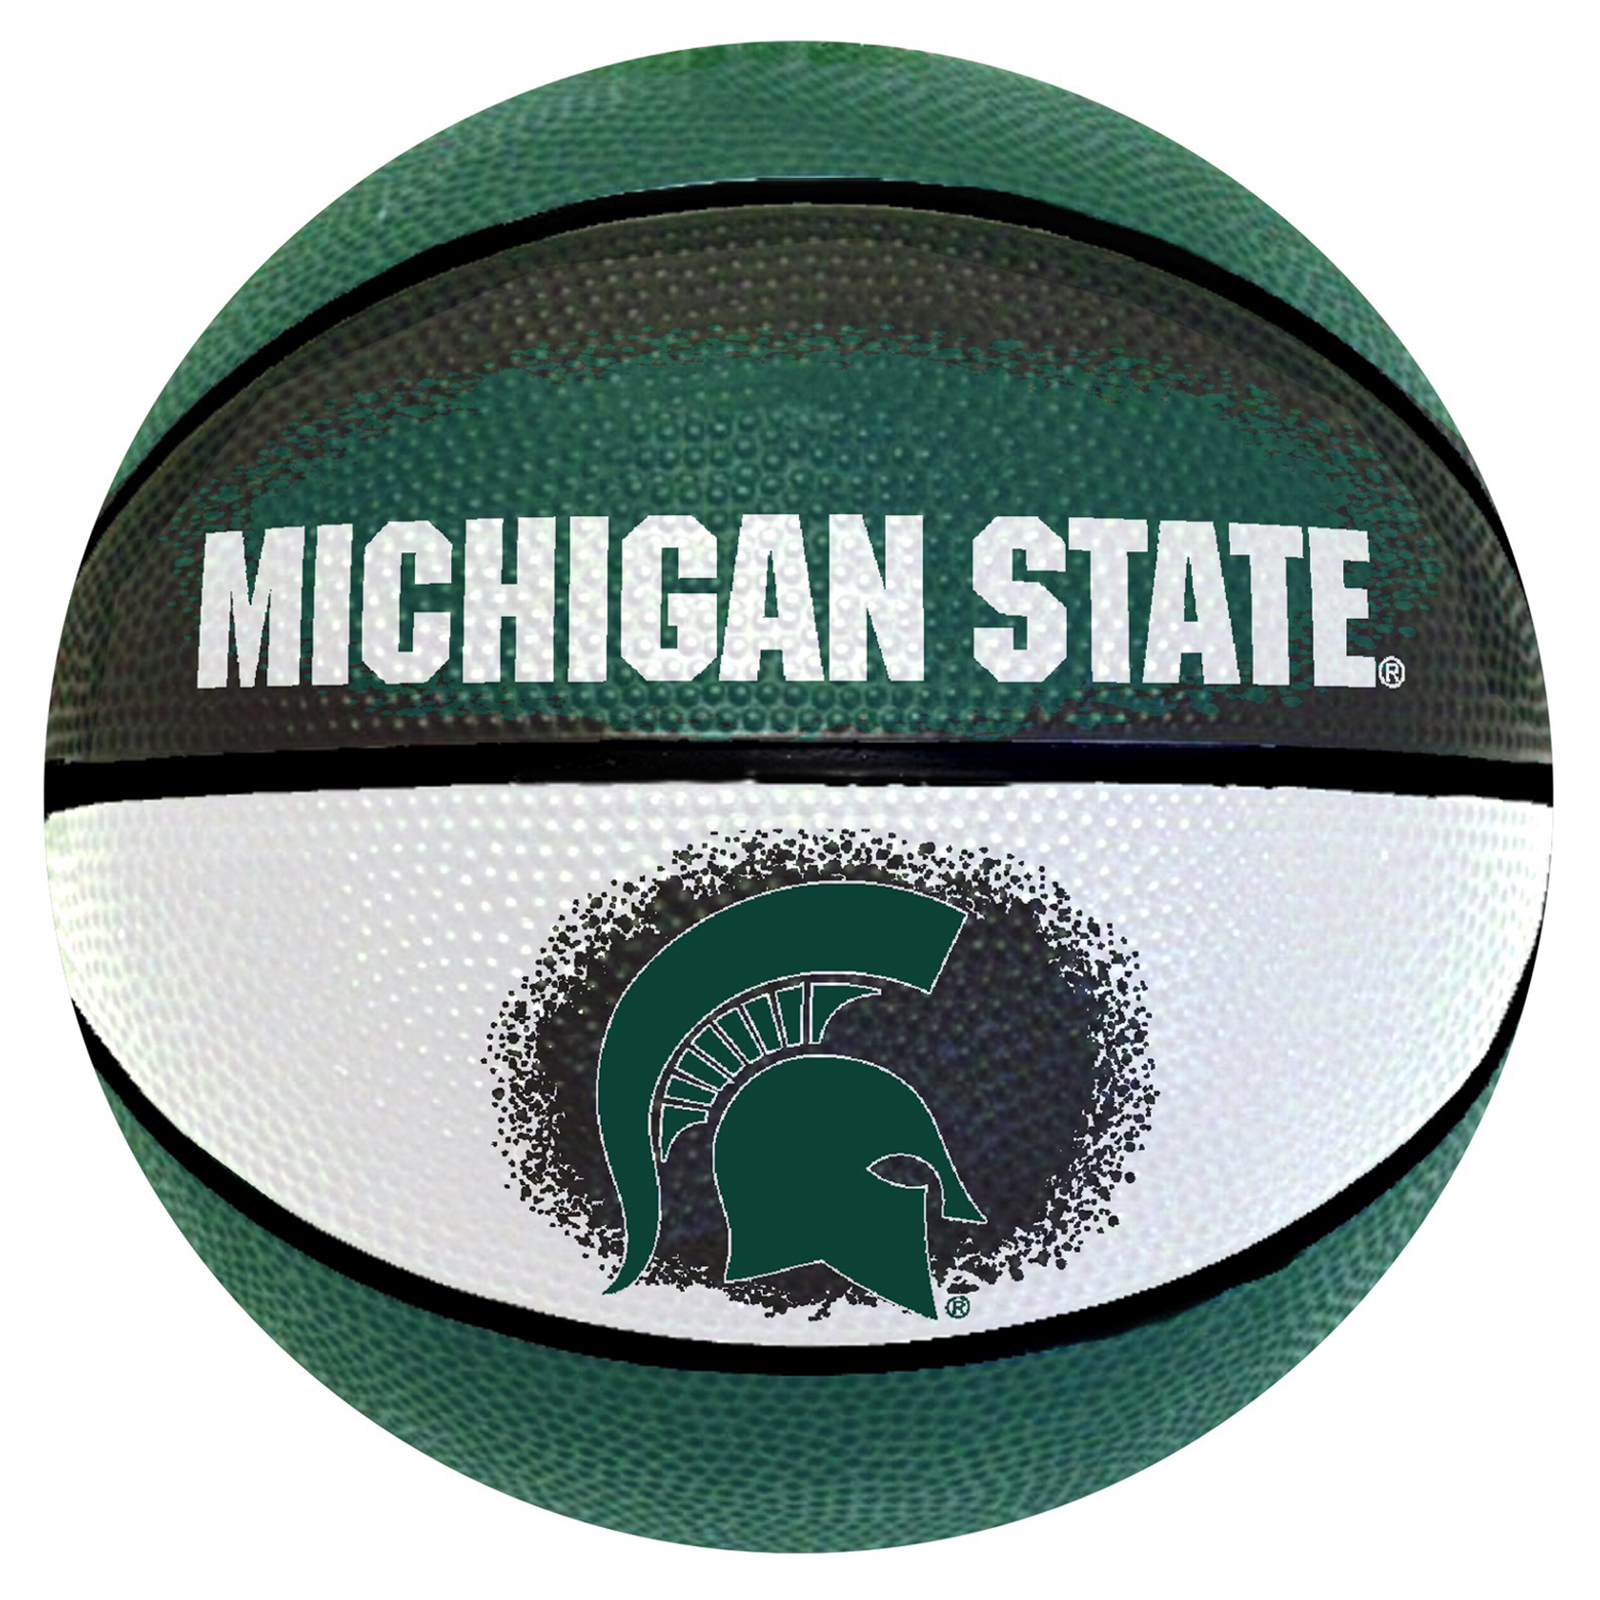 UPC 050386243119 product image for Wilson Michigan State Spartans NCAA 7-inch Mini Basketball | upcitemdb.com